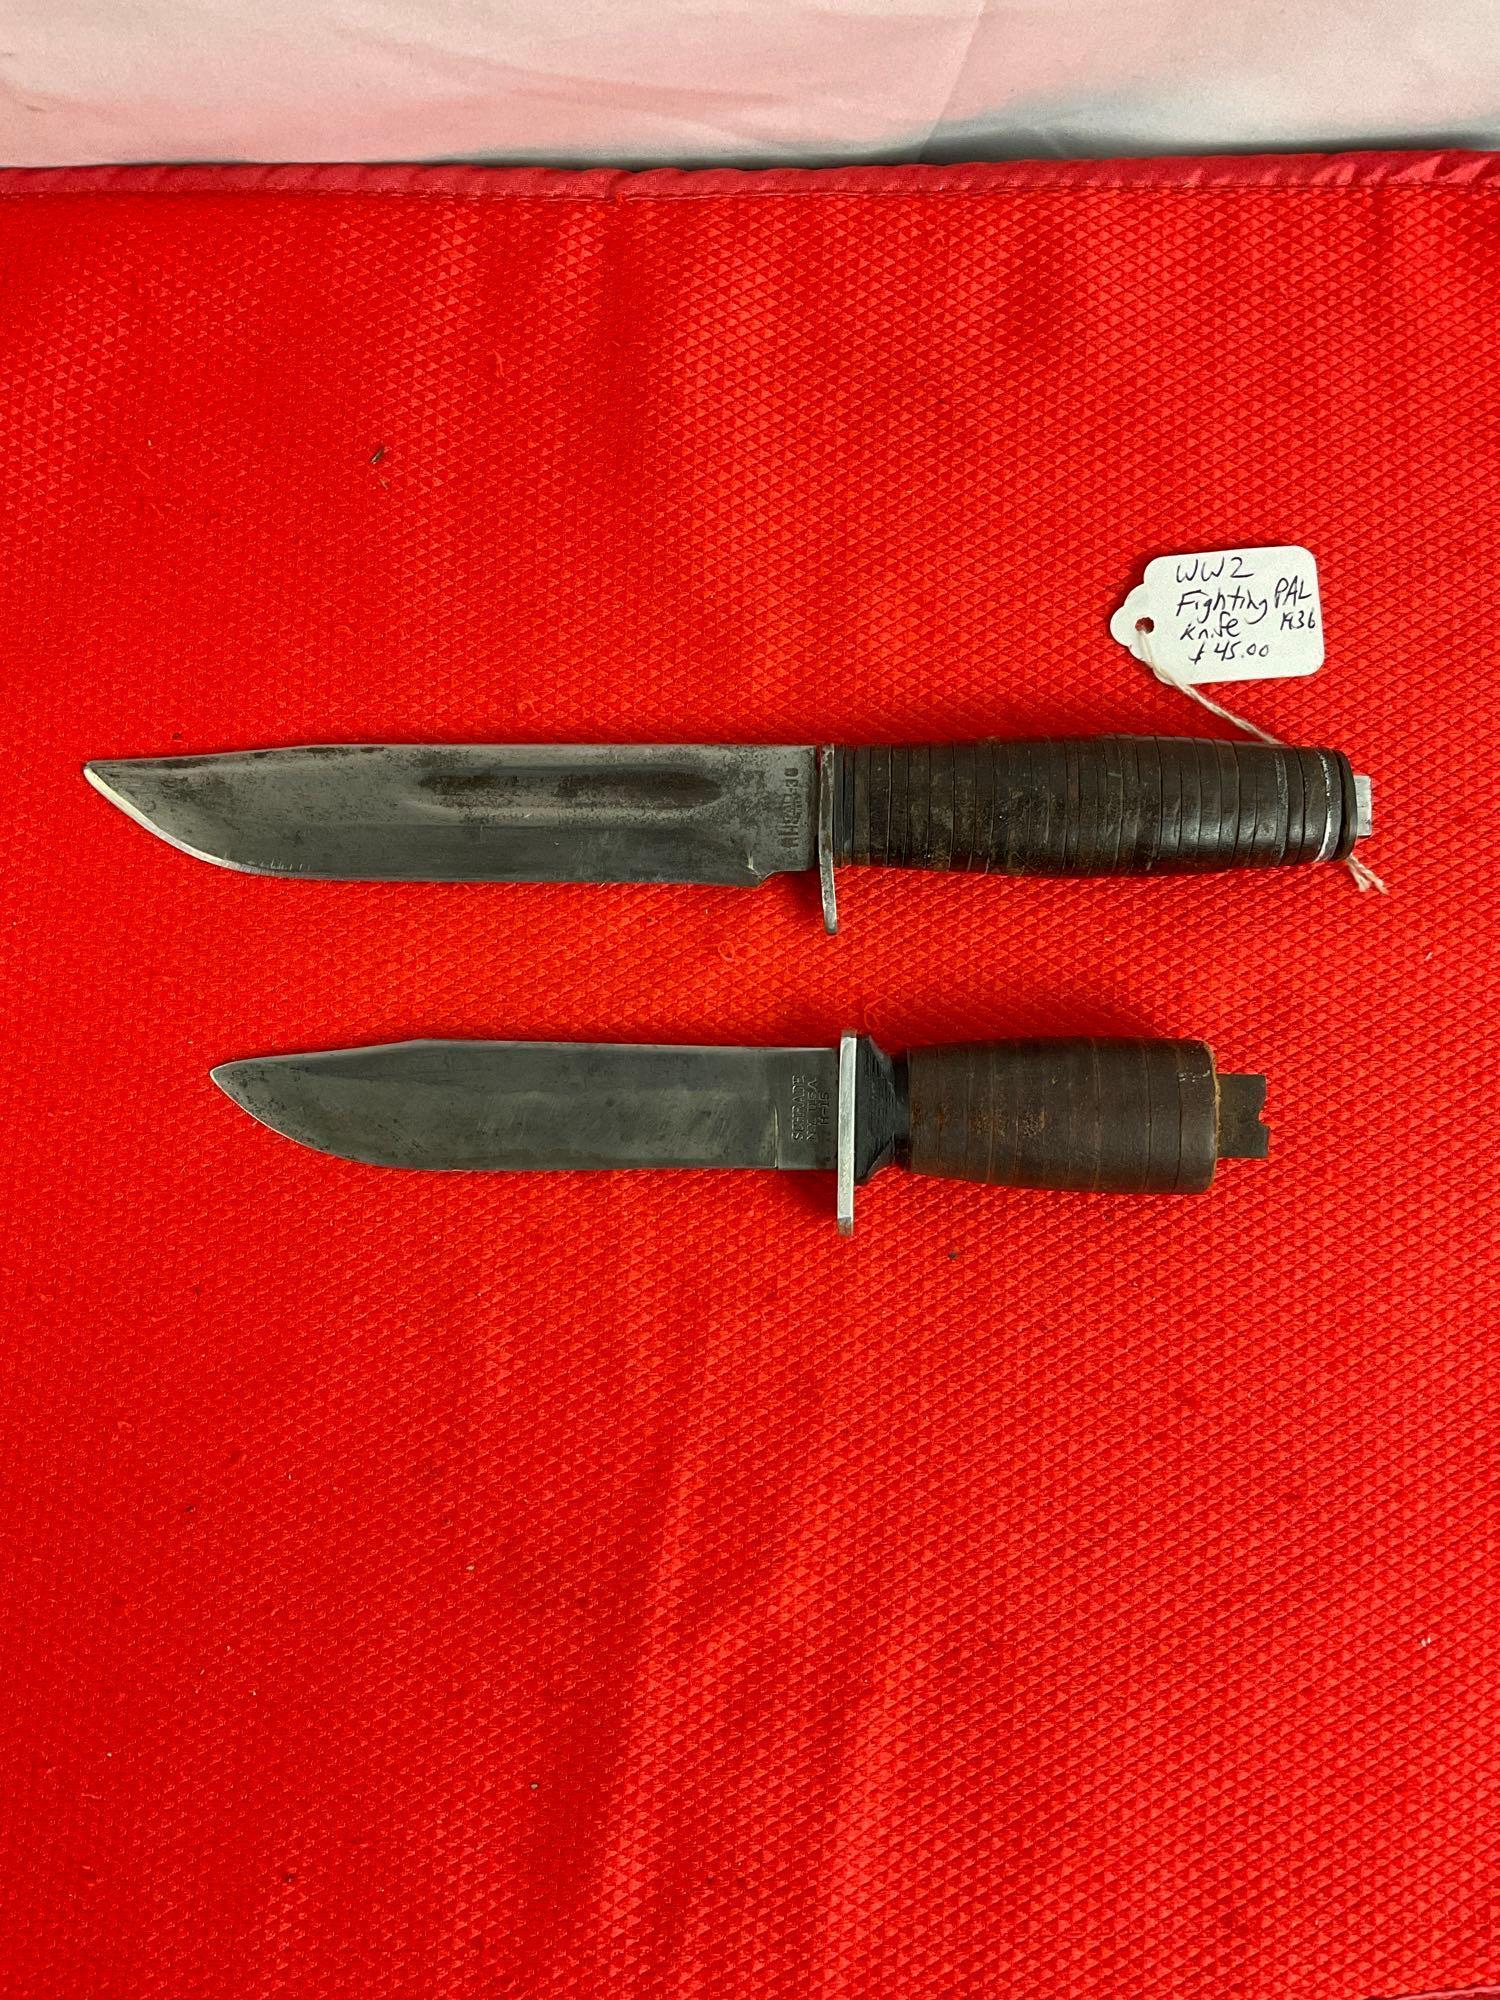 2 pcs Vintage Steel Fixed Blade Hunting Knives. Remington RH-36 & Schrade H-15. As Is. See pics.